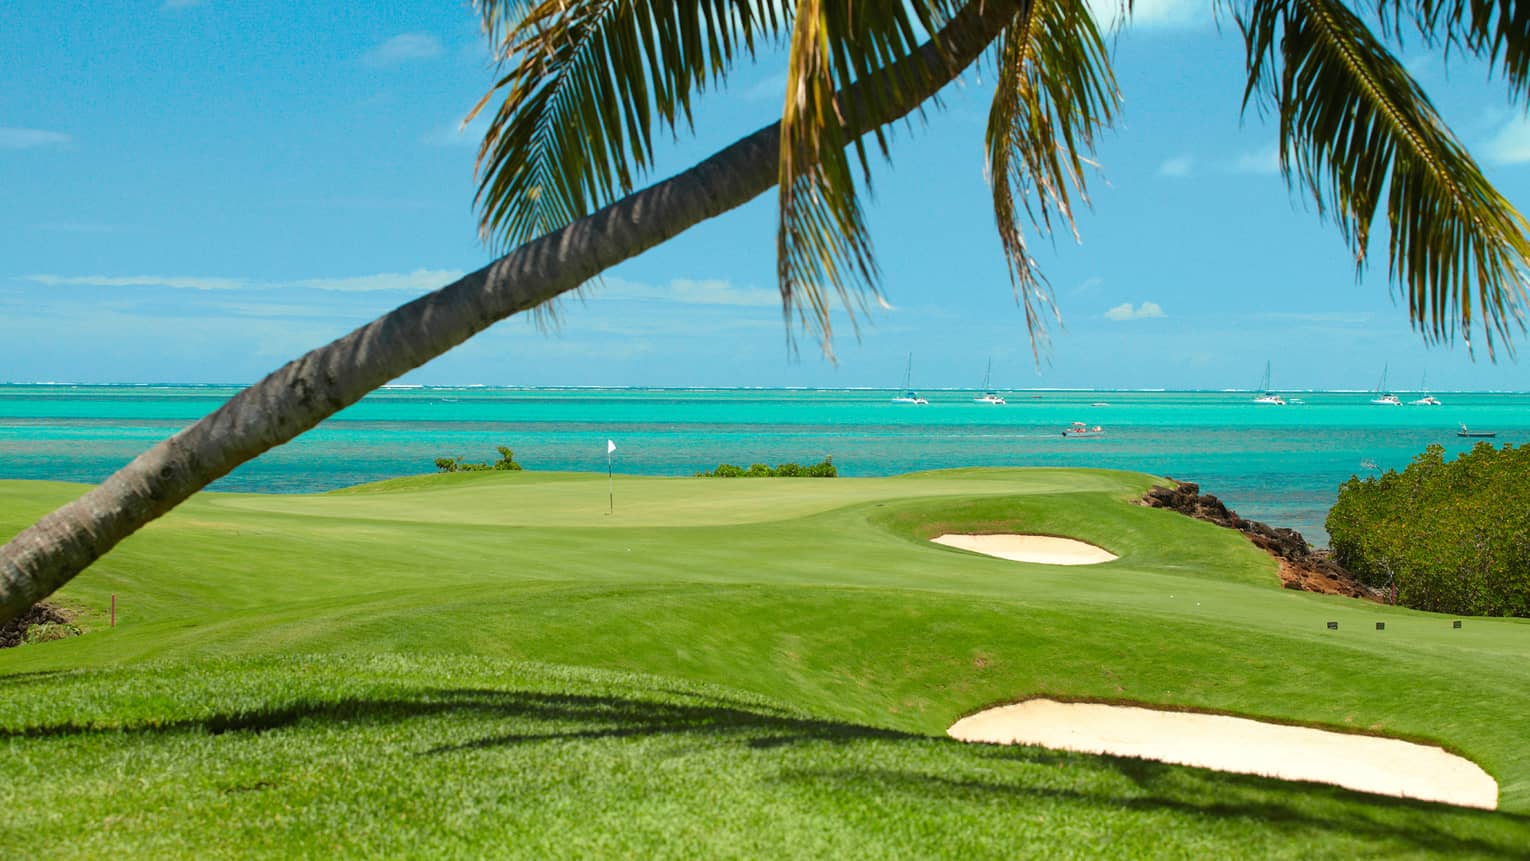 Palm tree hangs over golf course green, turquoise ocean in background